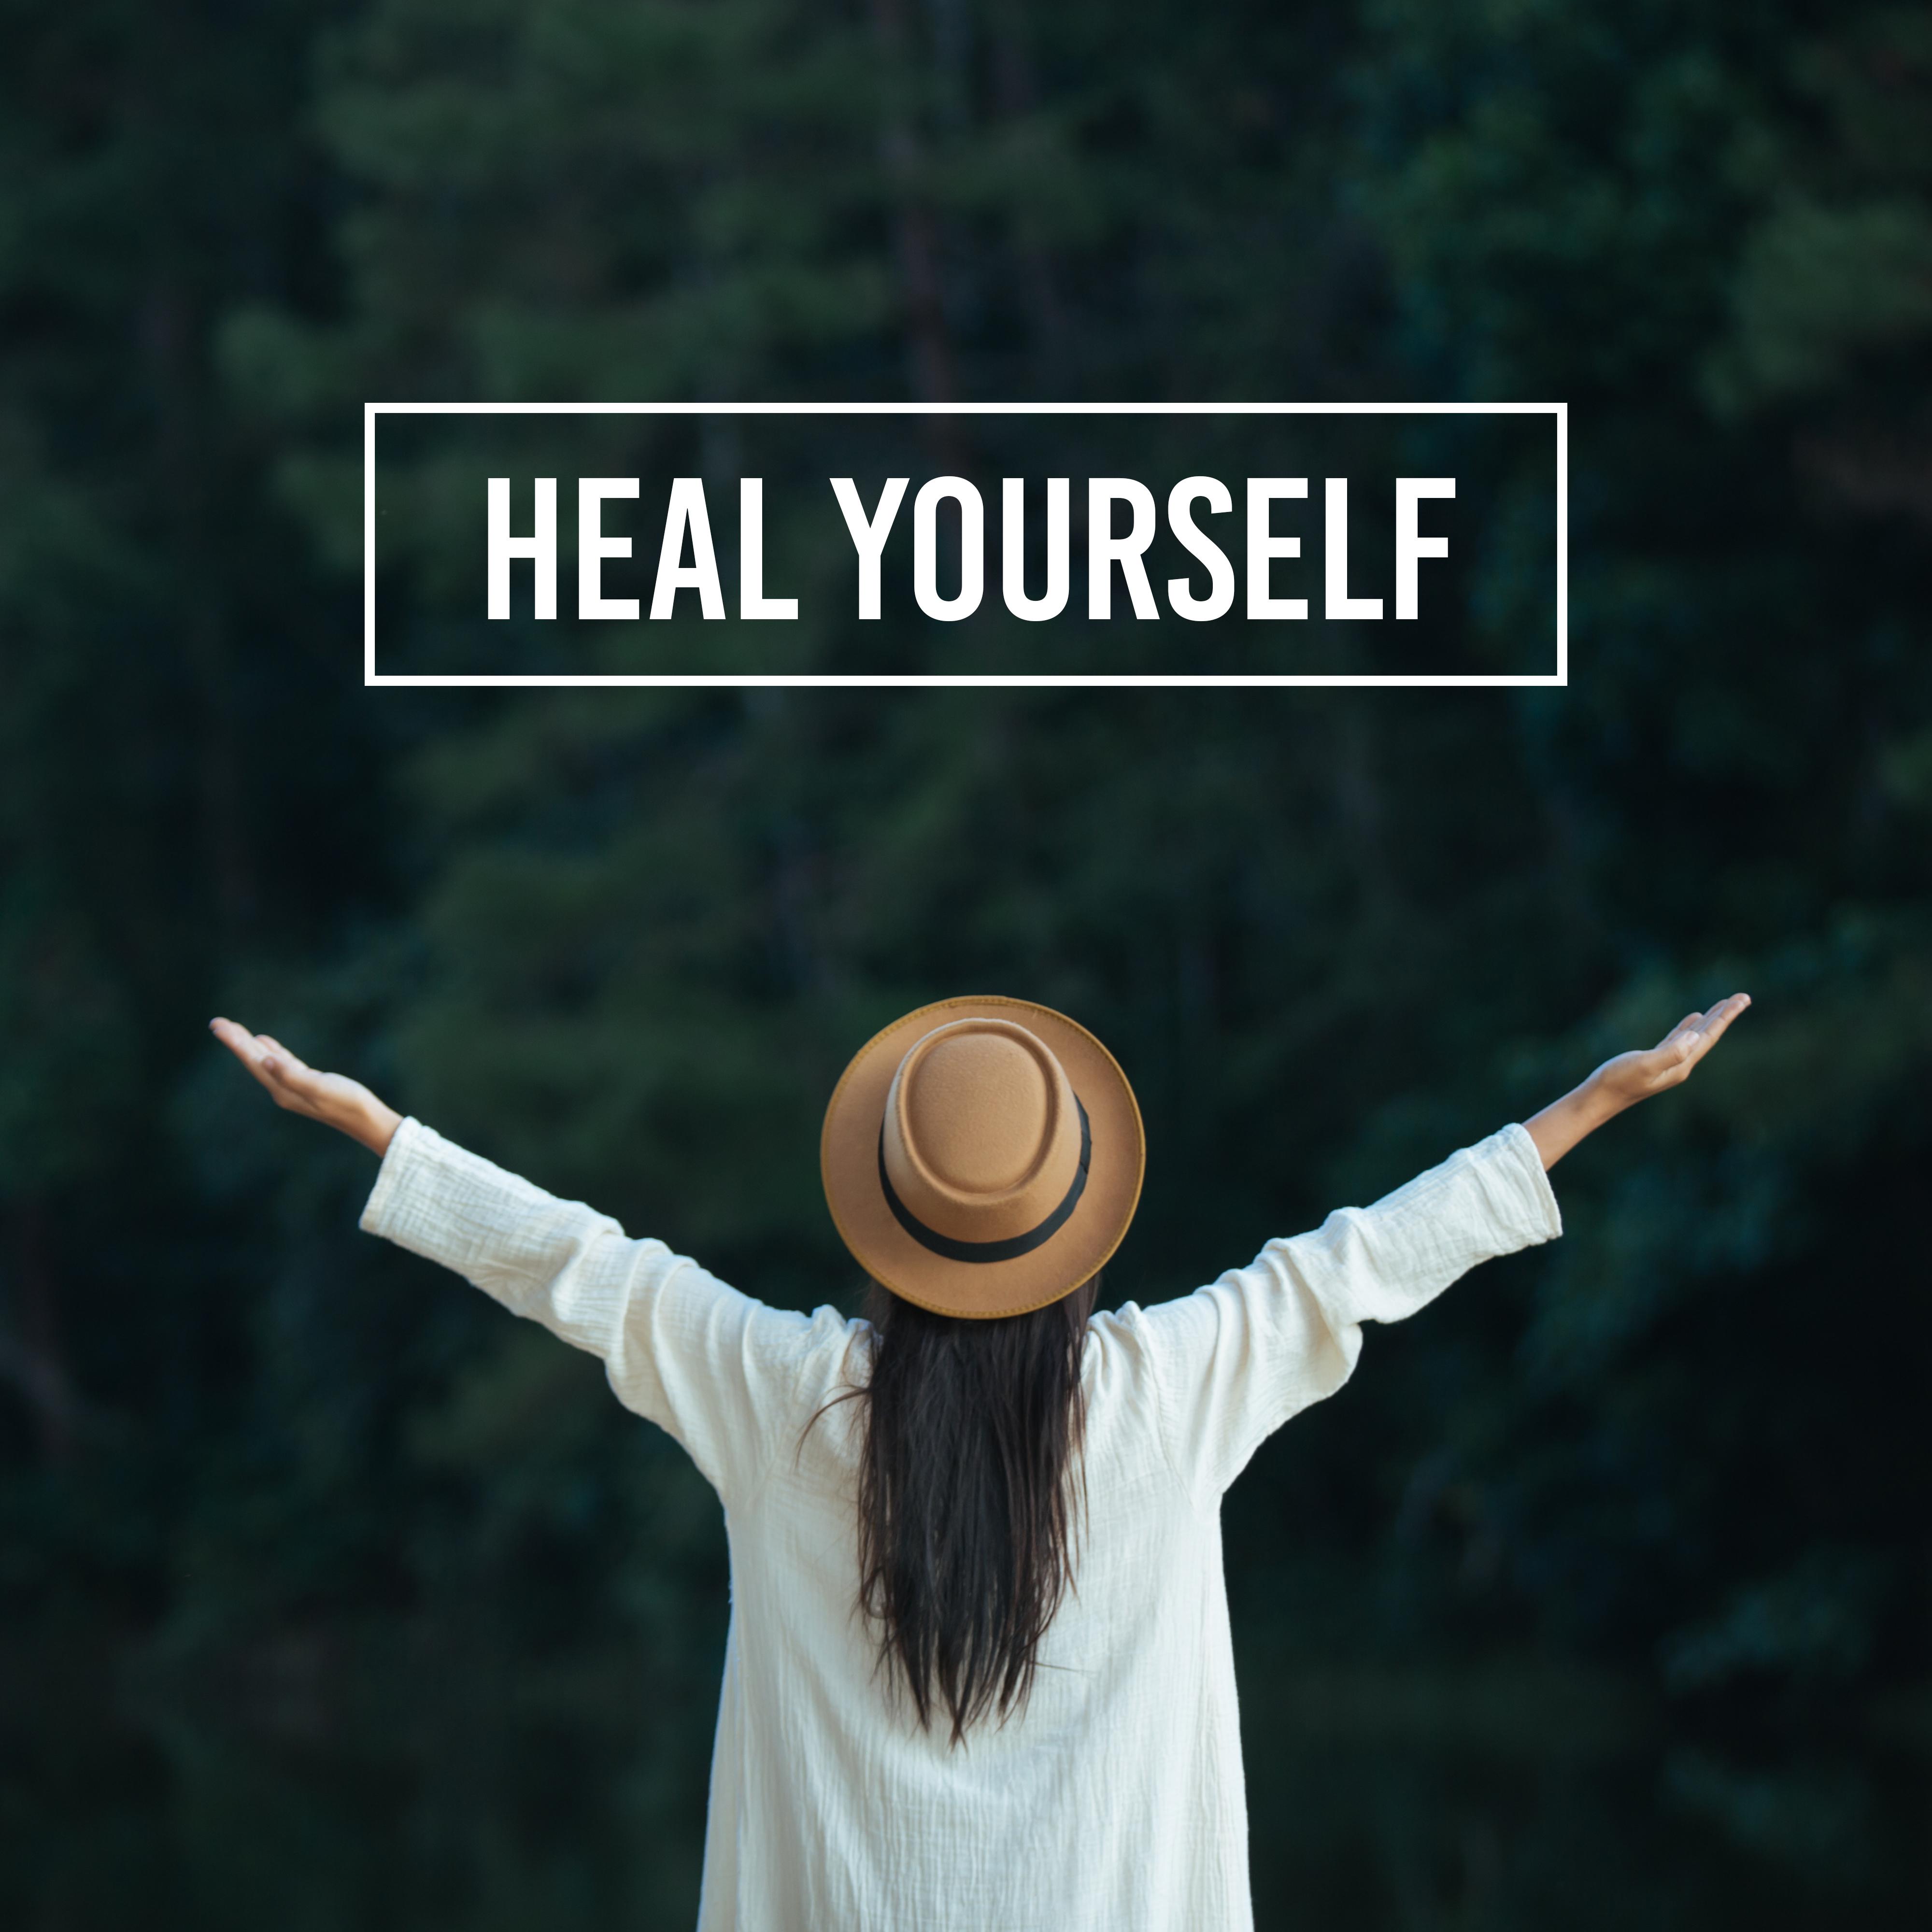 Heal Yourself with Healing Meditation Zone & Pure Spa Massage Music & Serenity Music Relaxation